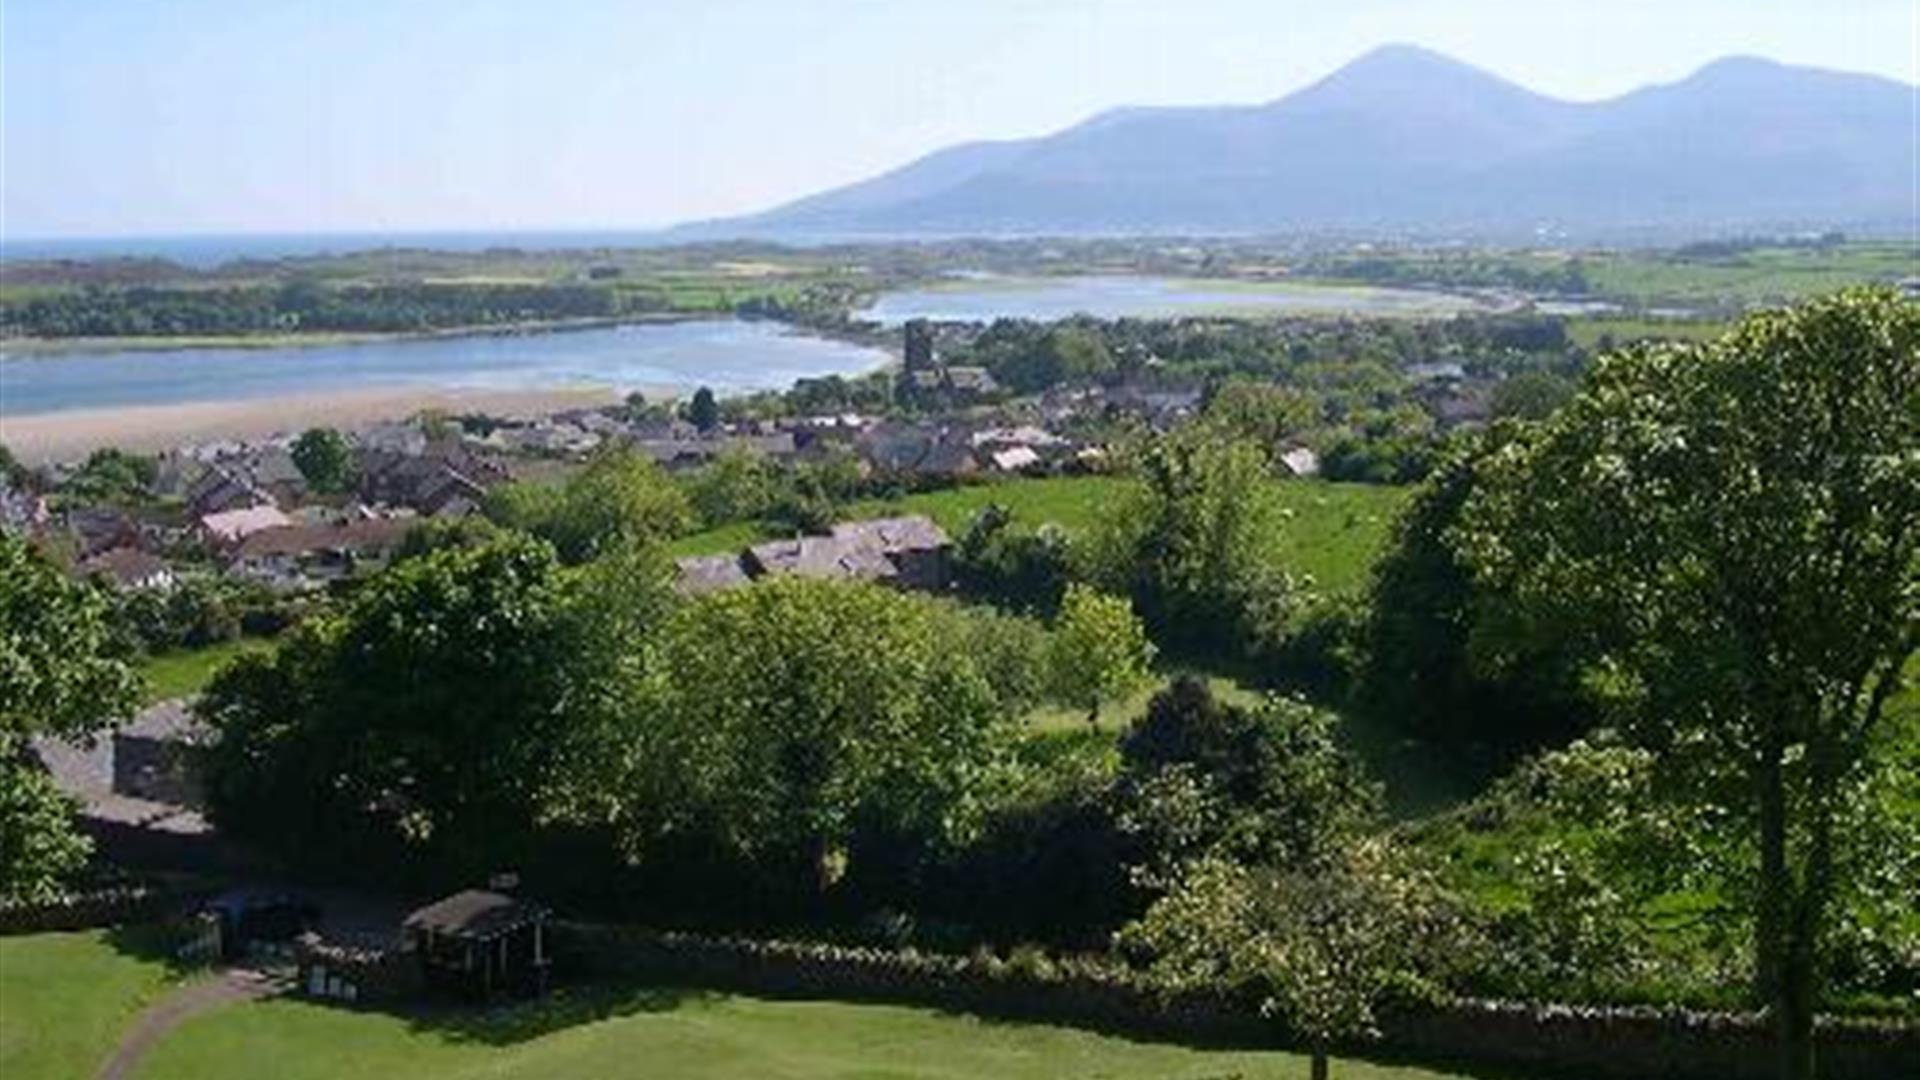 Dundrum Heritage Trail